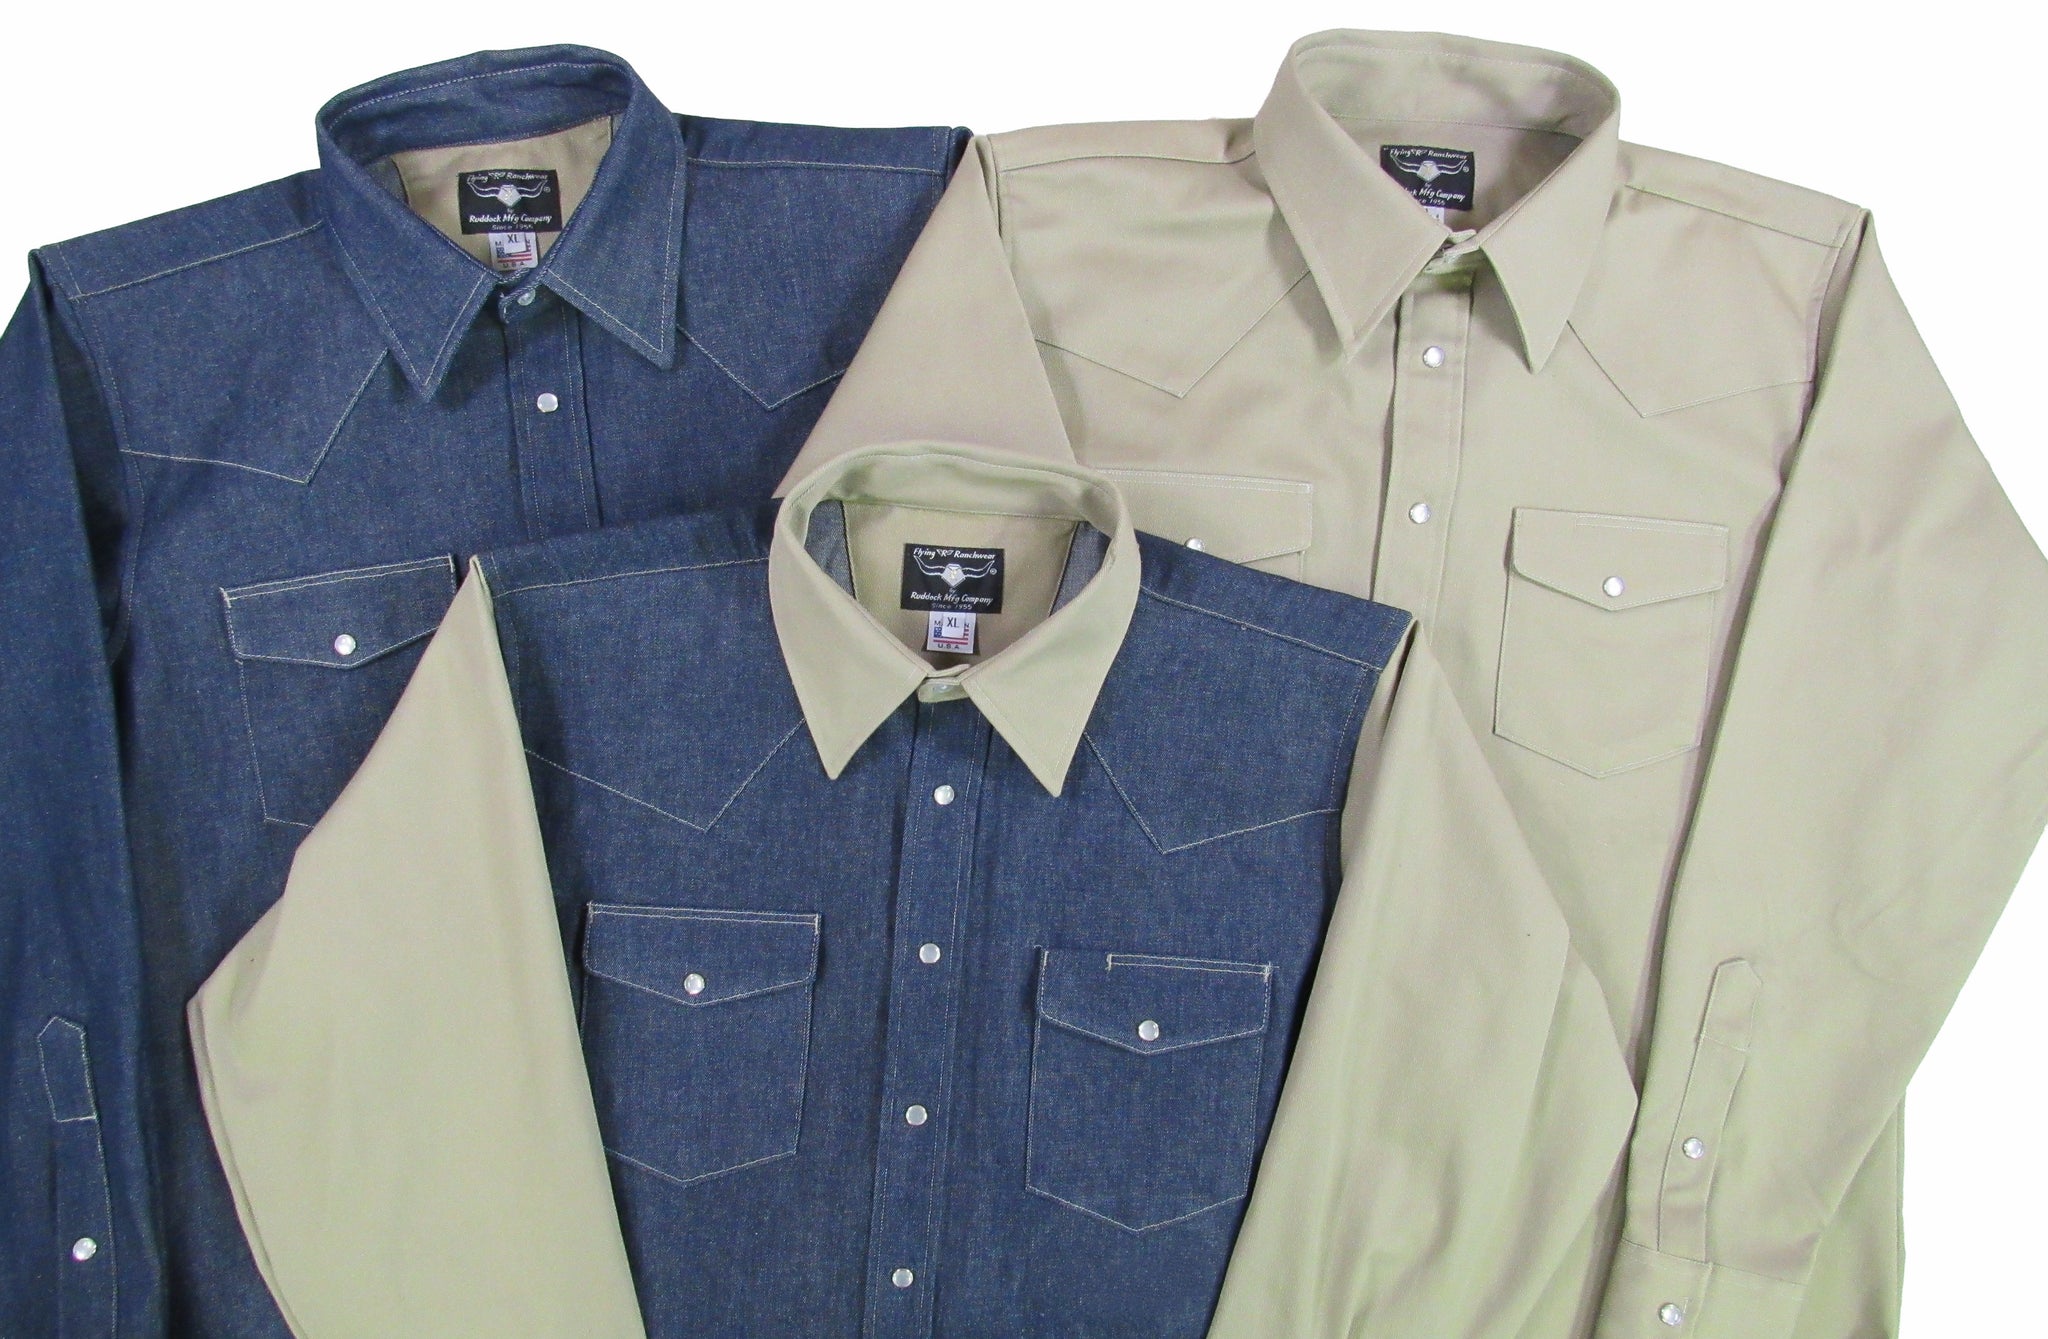 Group of Prairie Twill long sleeve shirts by Flying R Ranchwear Made in USA with snaps